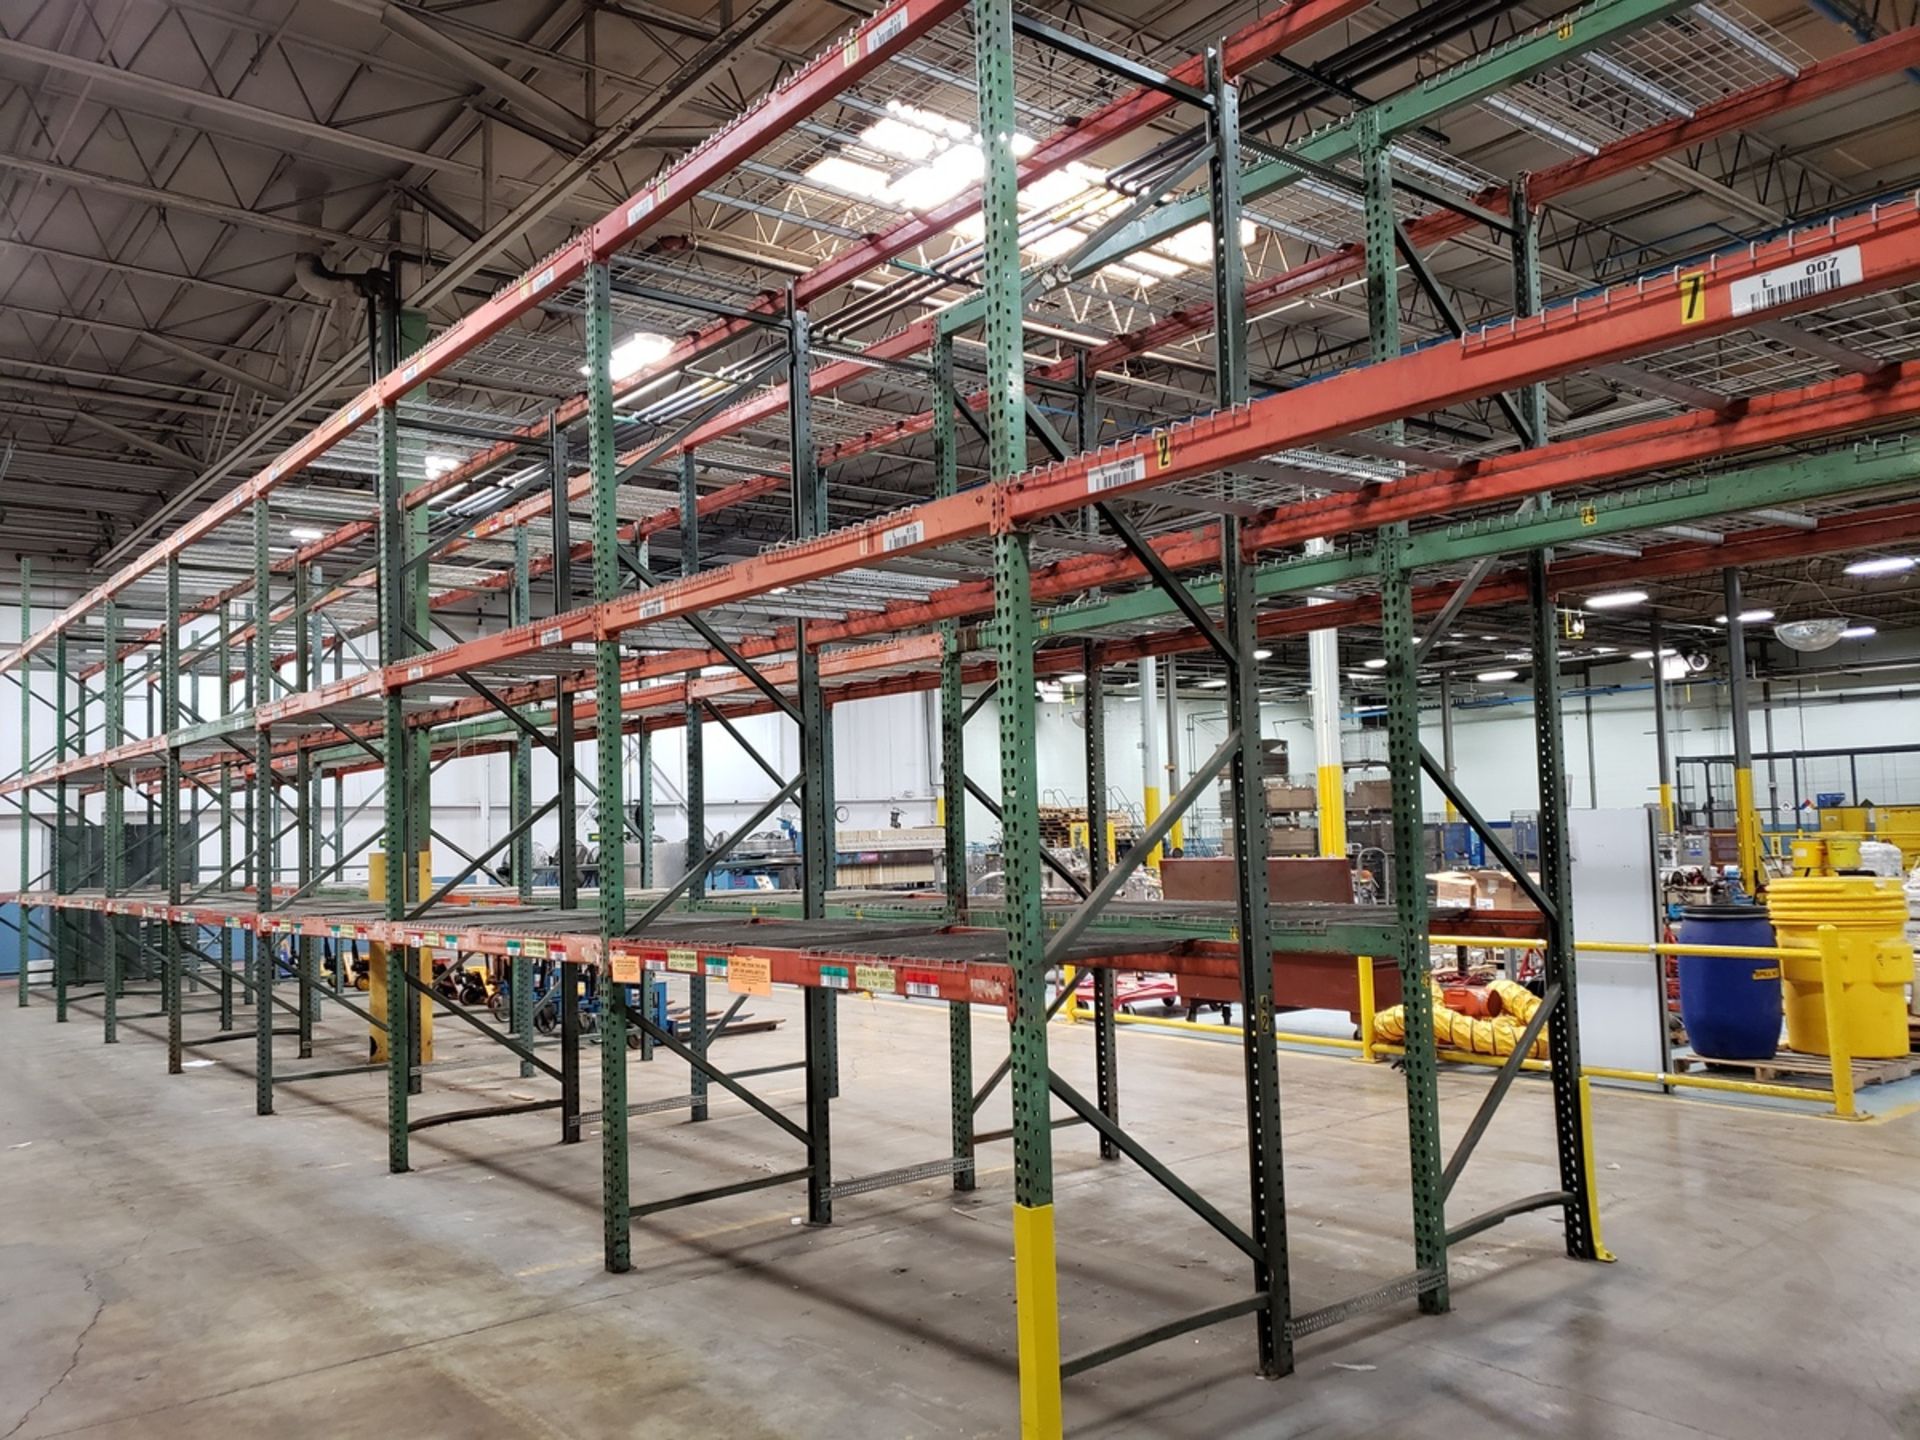 Pallet Rack Section, W/ (2) 42" X 18' Uprights, (4) 42" X 15' Upr - Subj to Bulk | Rig Fee: See Desc - Image 2 of 2